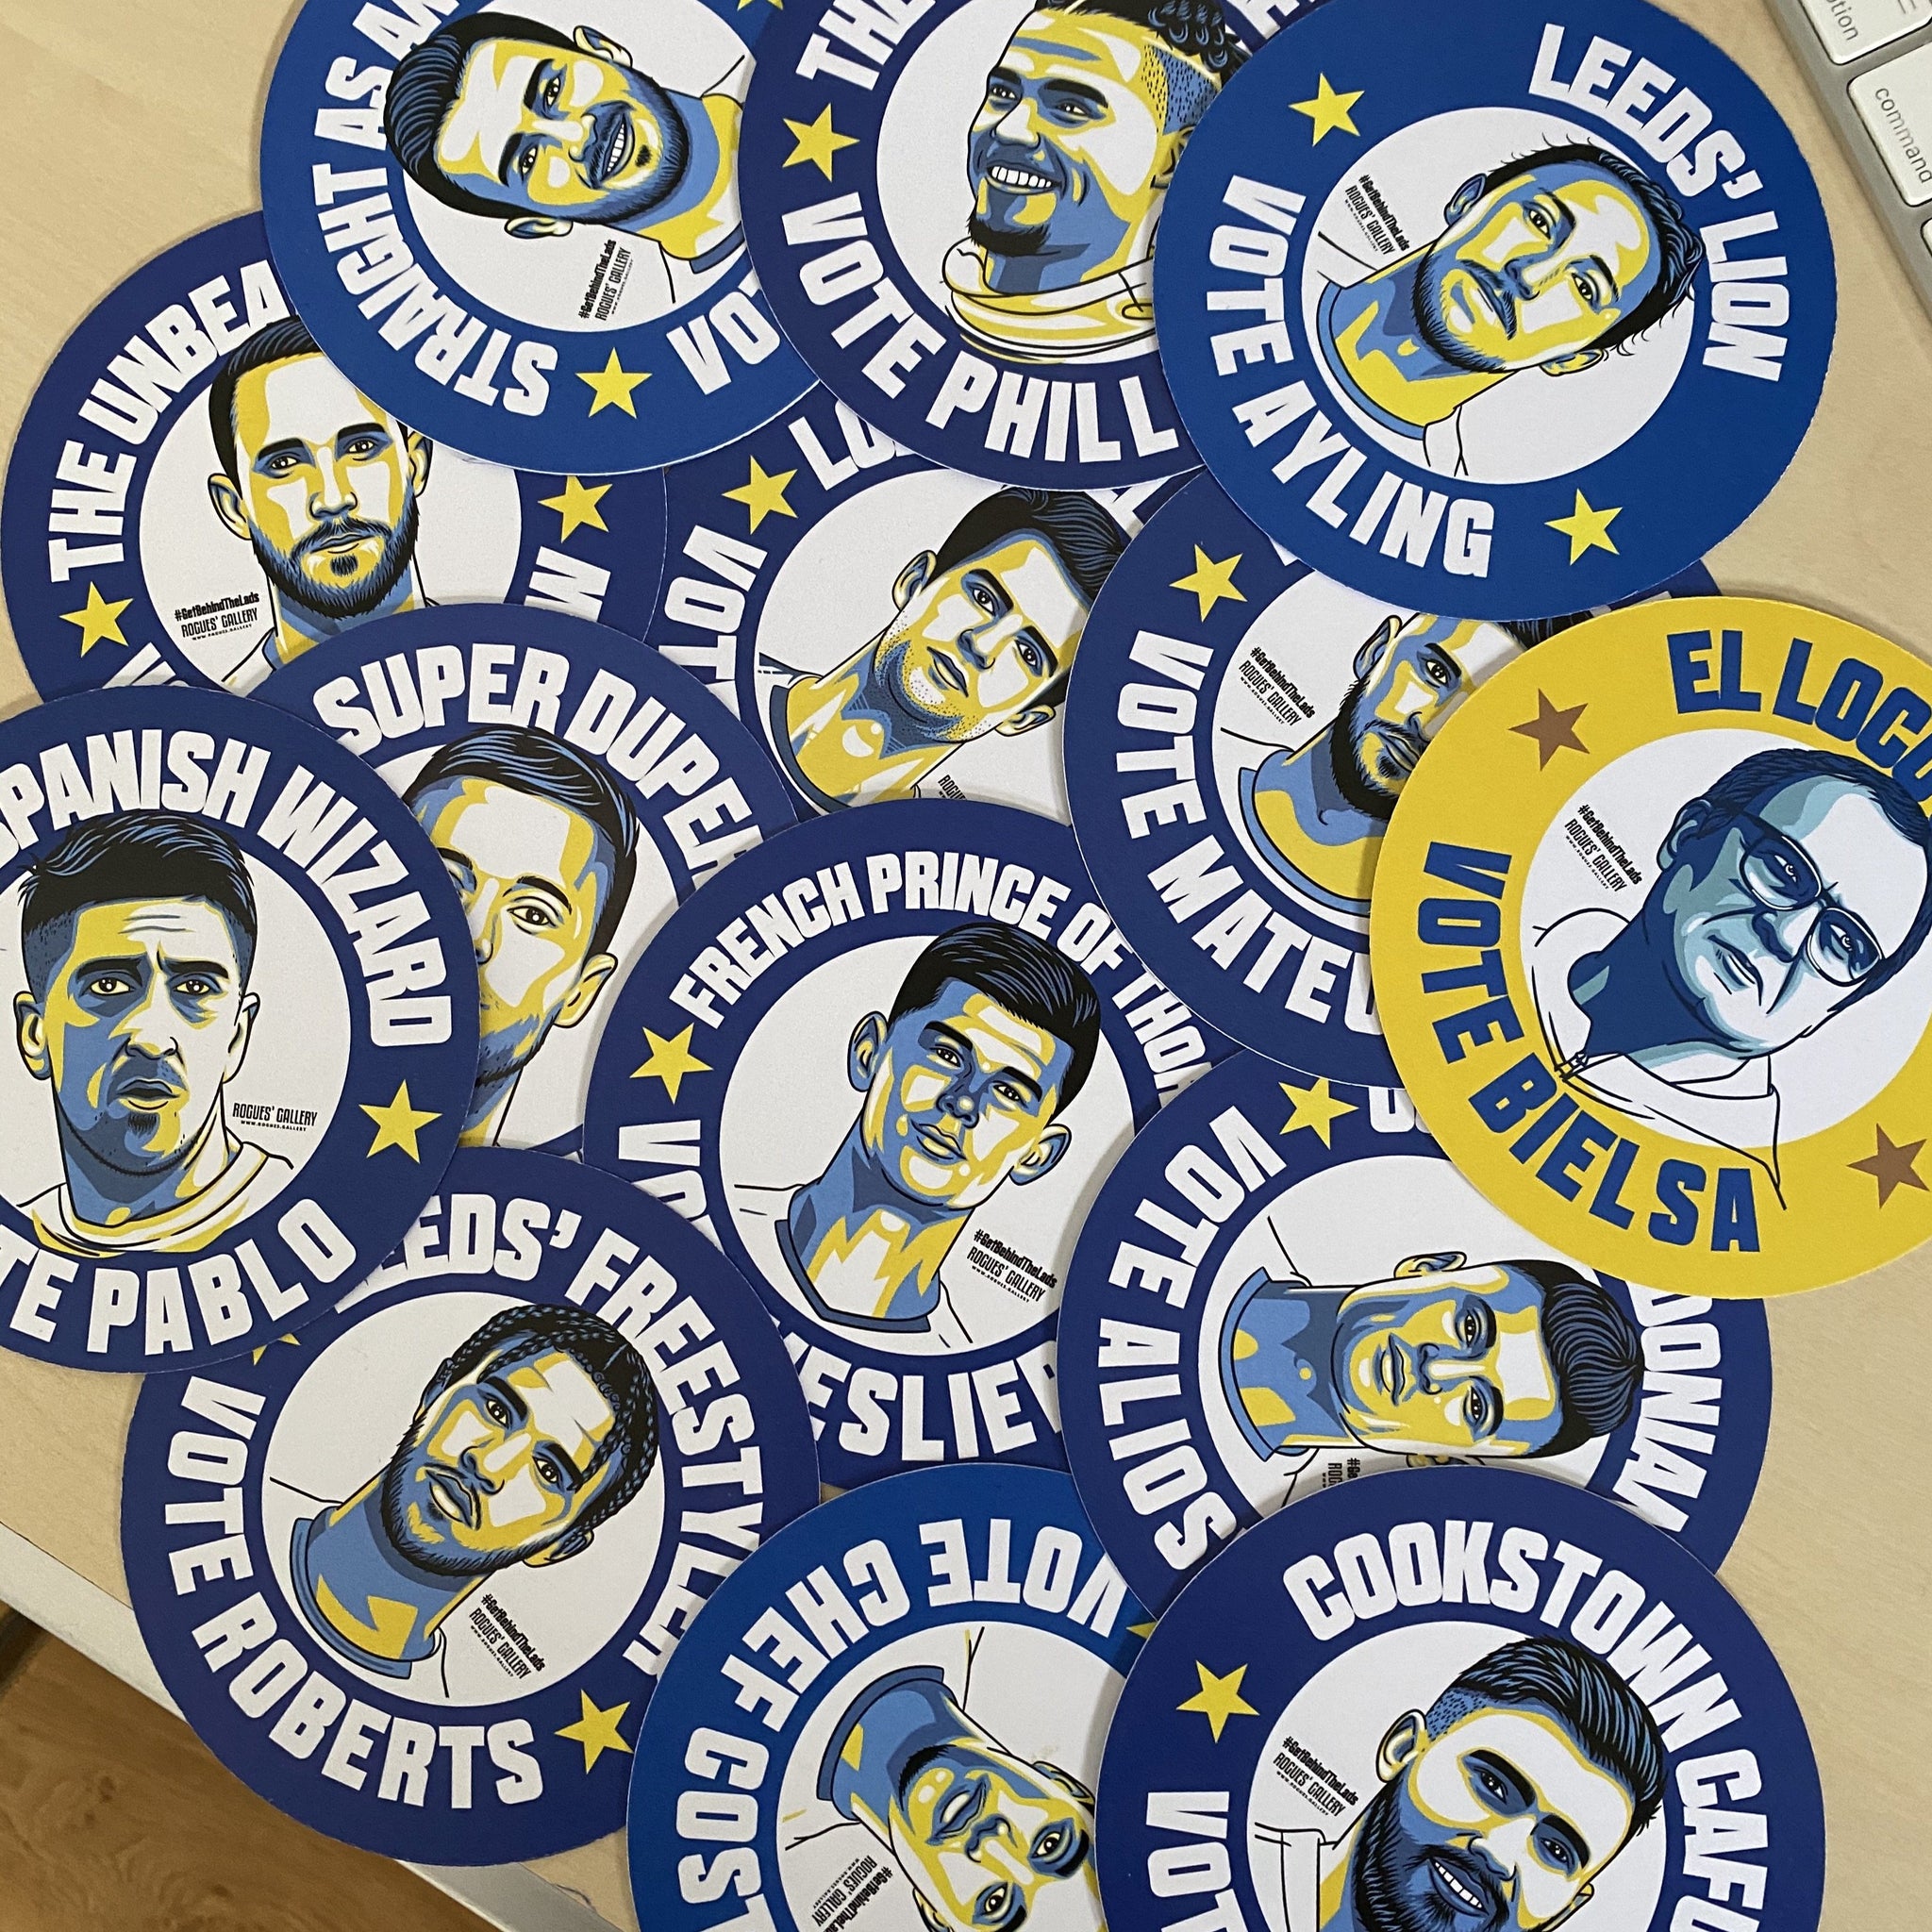 Leeds United SPECIAL BUNDLE #GetBehindTheLads Football Campaign Stickers or beer mats